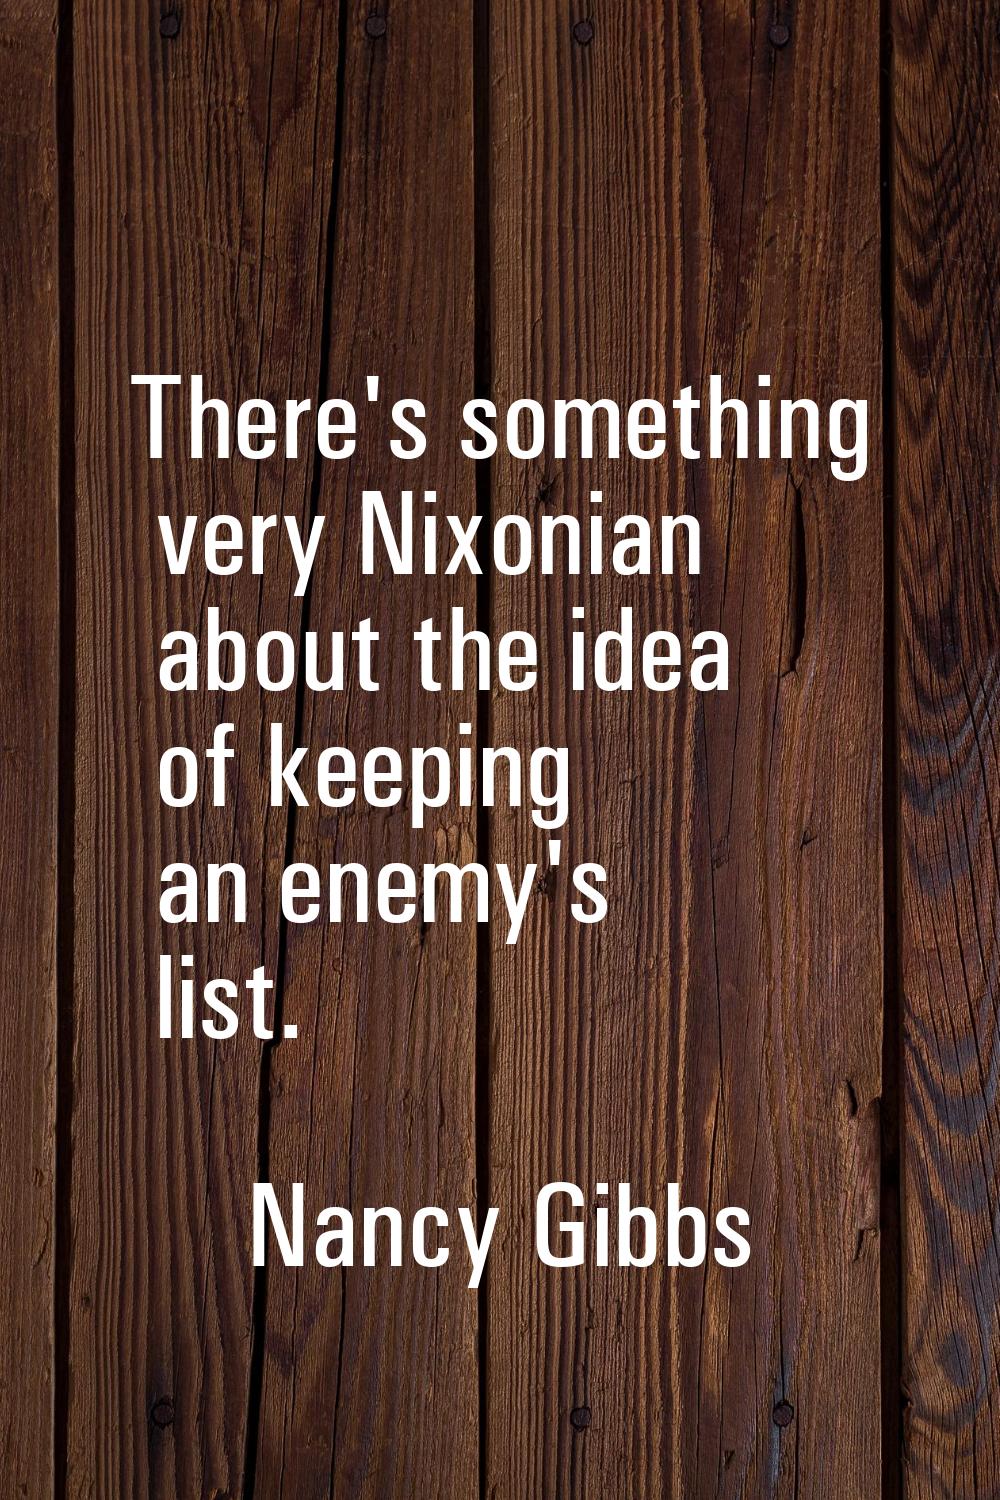 There's something very Nixonian about the idea of keeping an enemy's list.